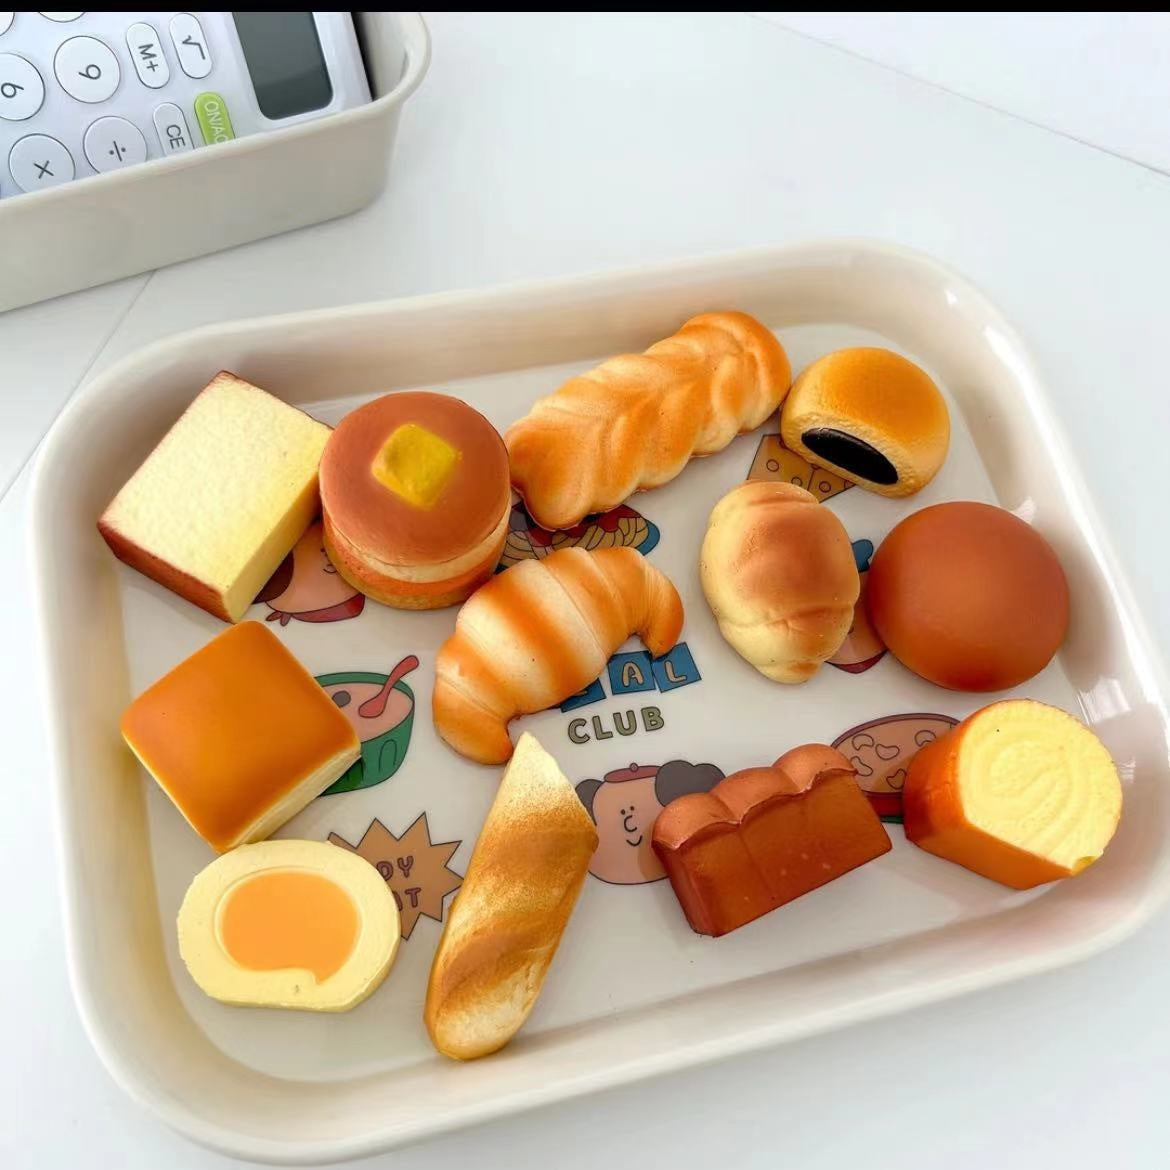 Tallpa Squishy Simulation Food - Bread Decompression Stress Relief Toys (Free Shipping Included) (*Not Edible*)